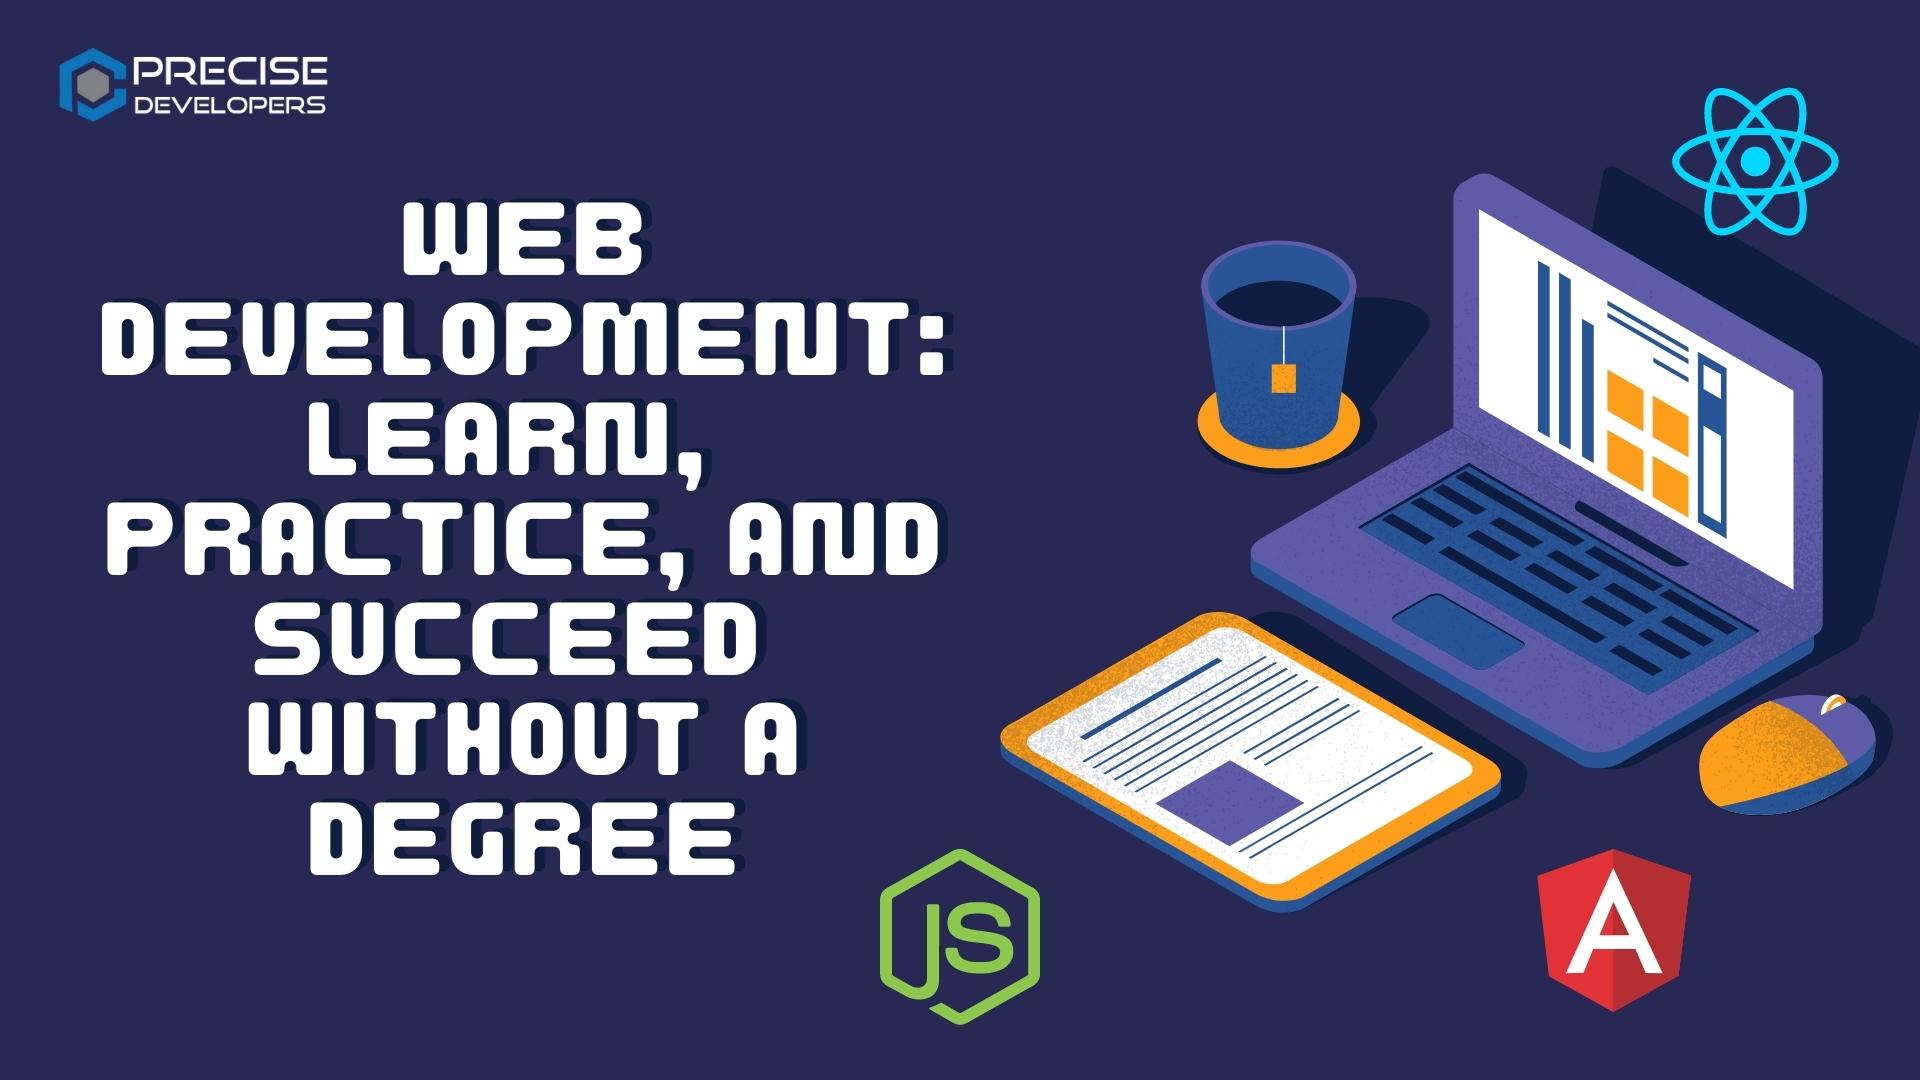 Web Development Learn, Practice, and succeed without a degree Precise Developers